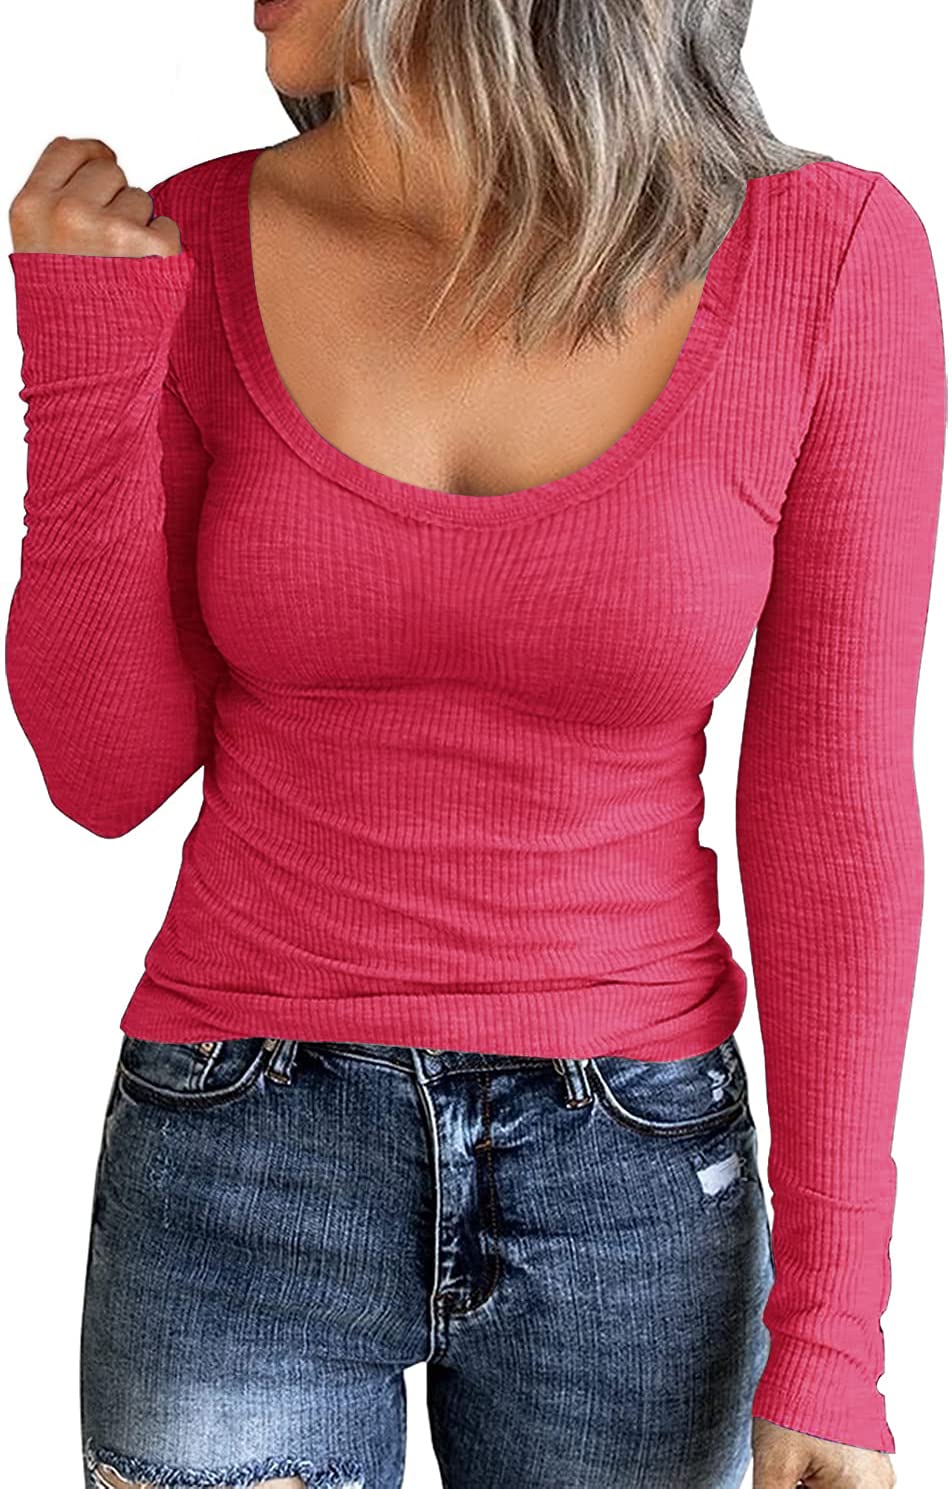 Roselux Women Long Sleeve Scoop Neck Ribbed Fitted Knit Shirt Cotton Basic Thermal Henley Tops (Hot Pink S)